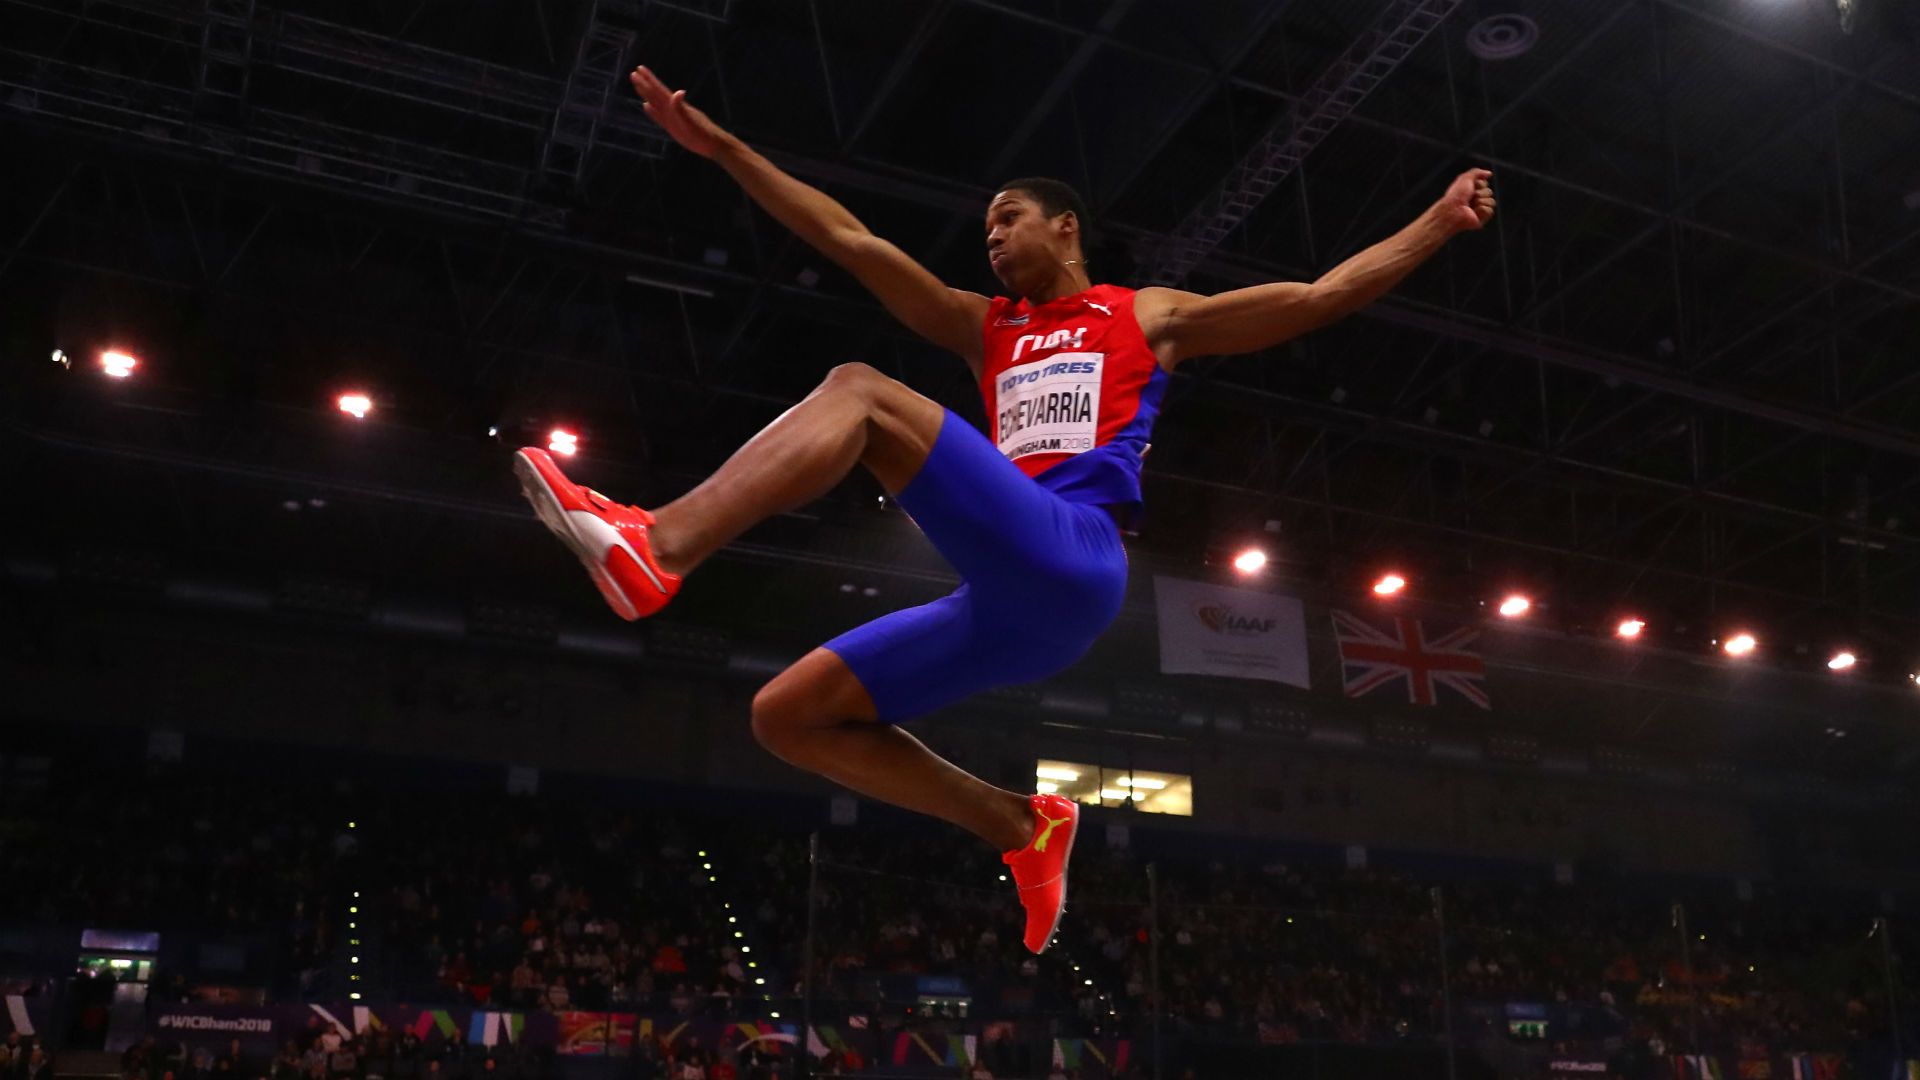 Echevarria produces stunning Stockholm long jump